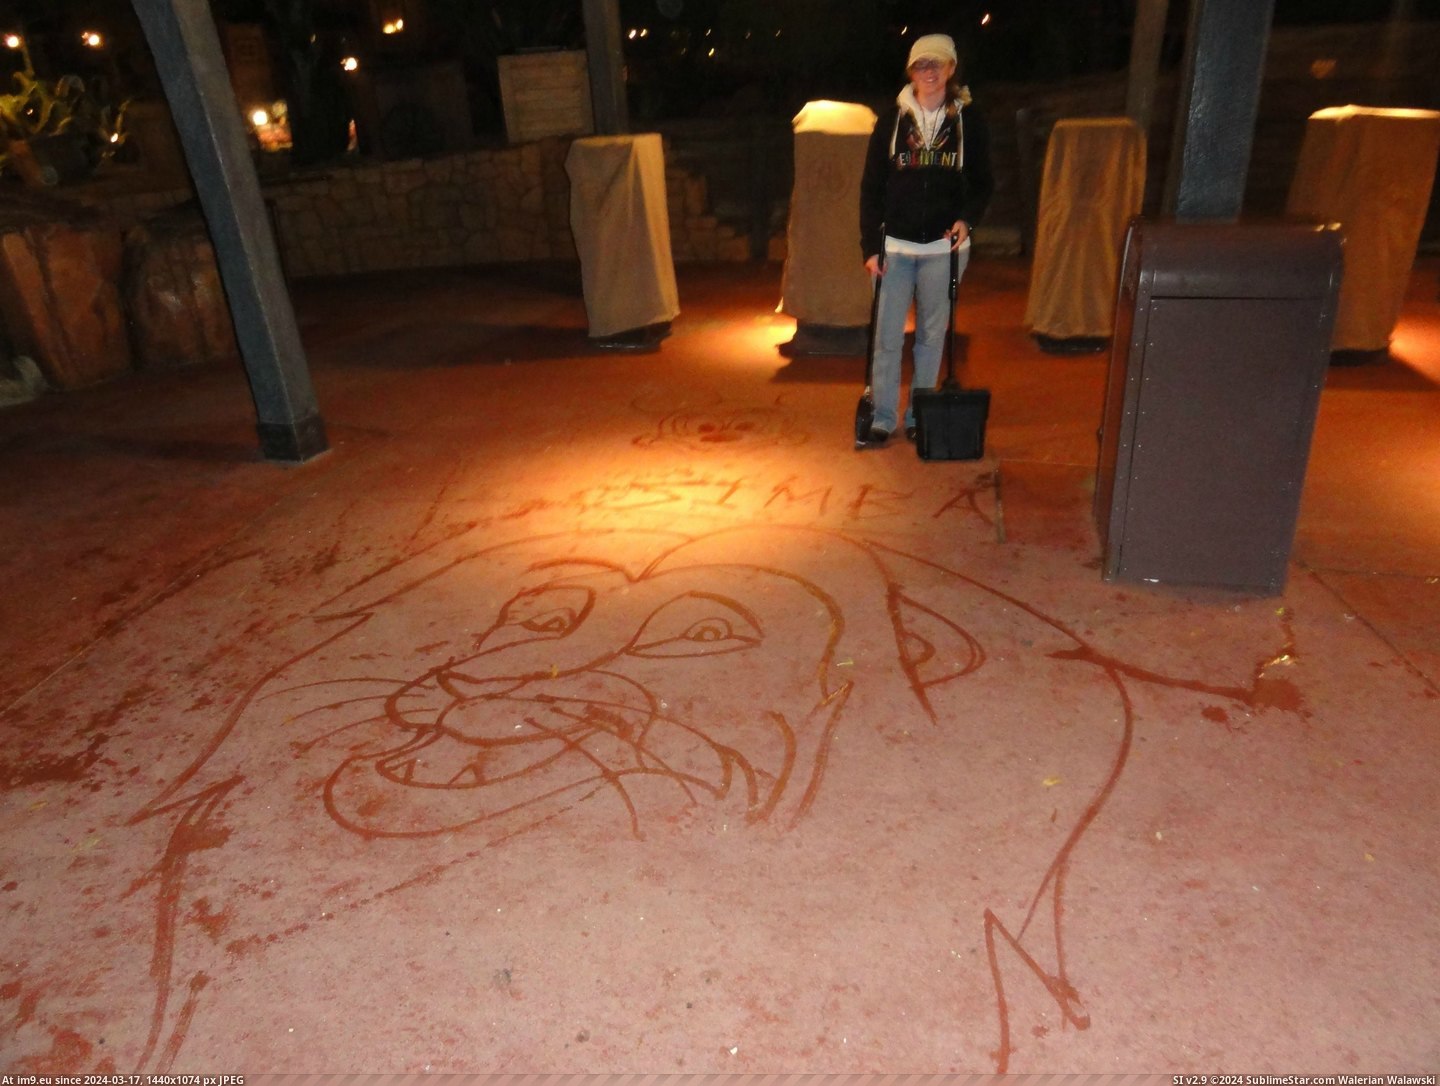 #World #Water #Disney #Guests #Janitor #Broom #Entertain #Characters #Drew #Sidewalk [Pics] As a janitor at Disney World, I drew characters with water and a broom on the sidewalk to entertain guests. 9 Pic. (Image of album My r/PICS favs))